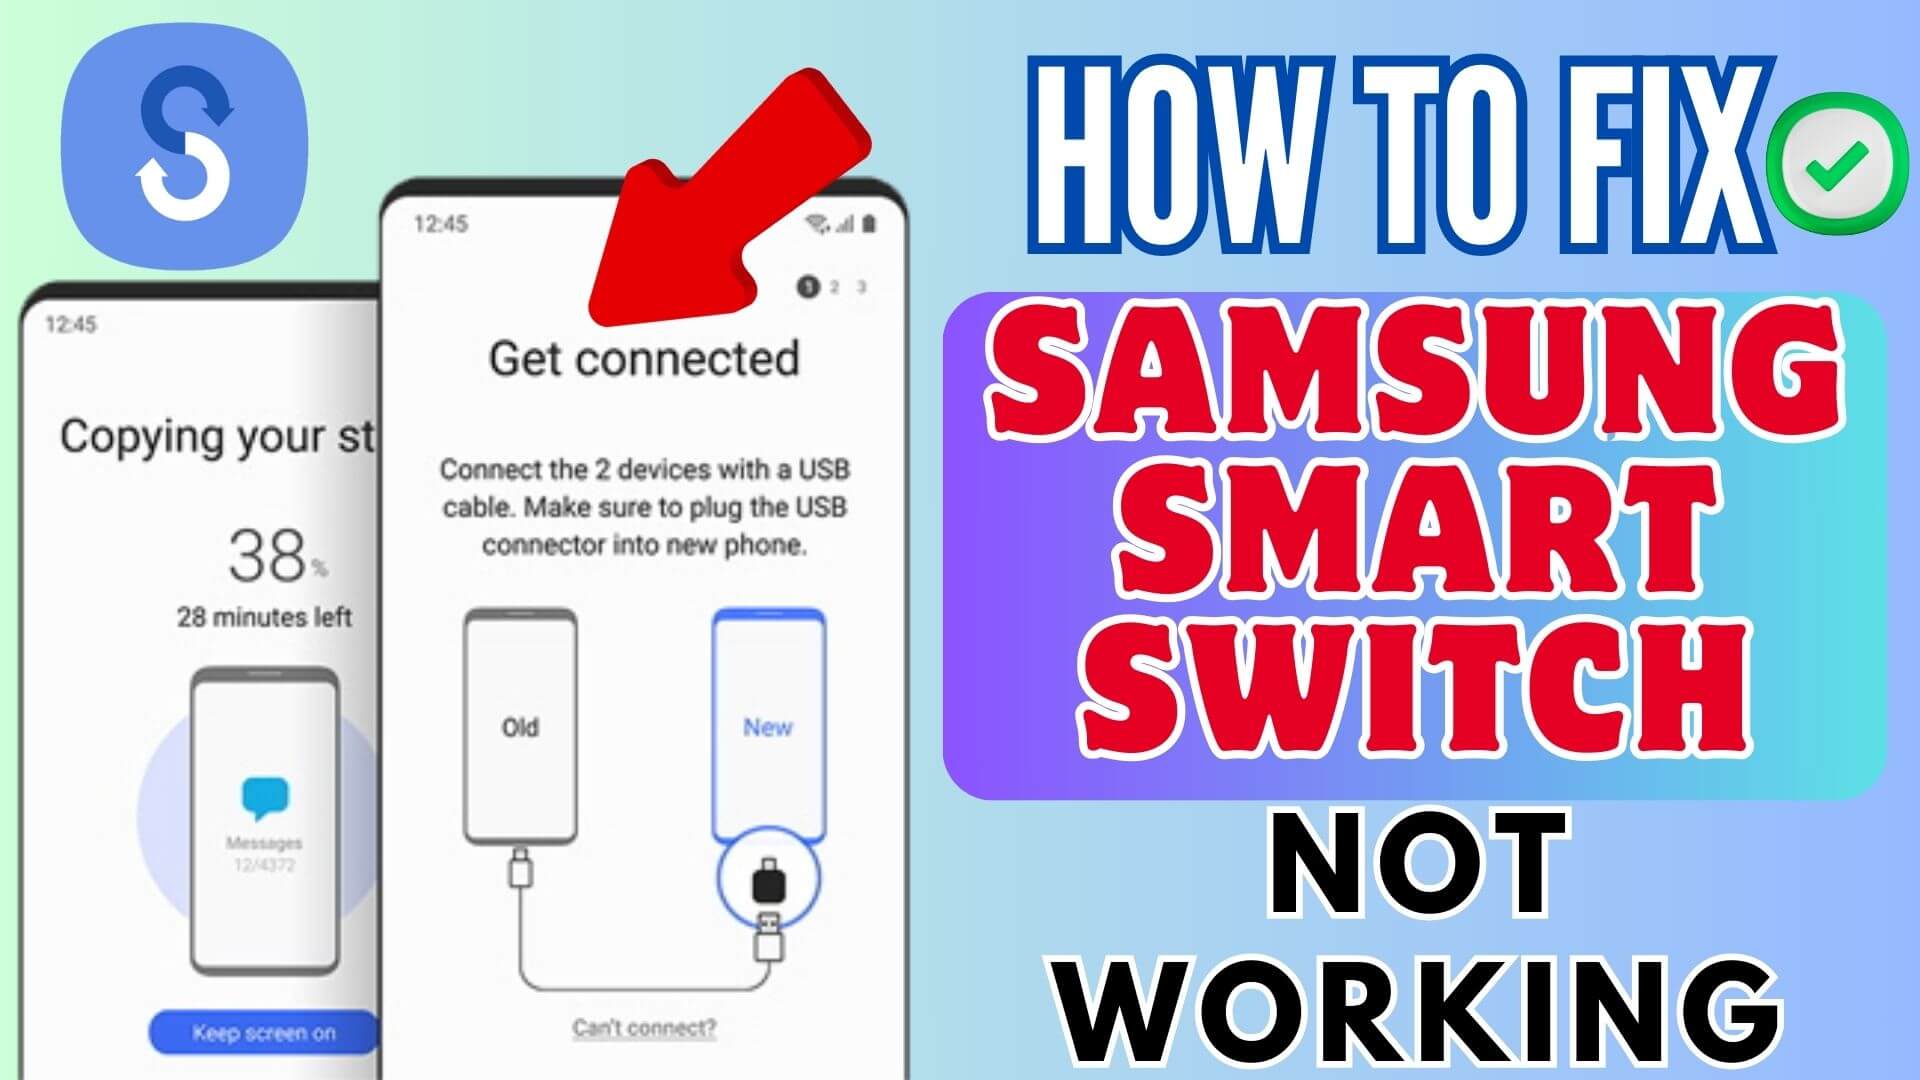 How To Fix Samsung Smart Switch Not Working